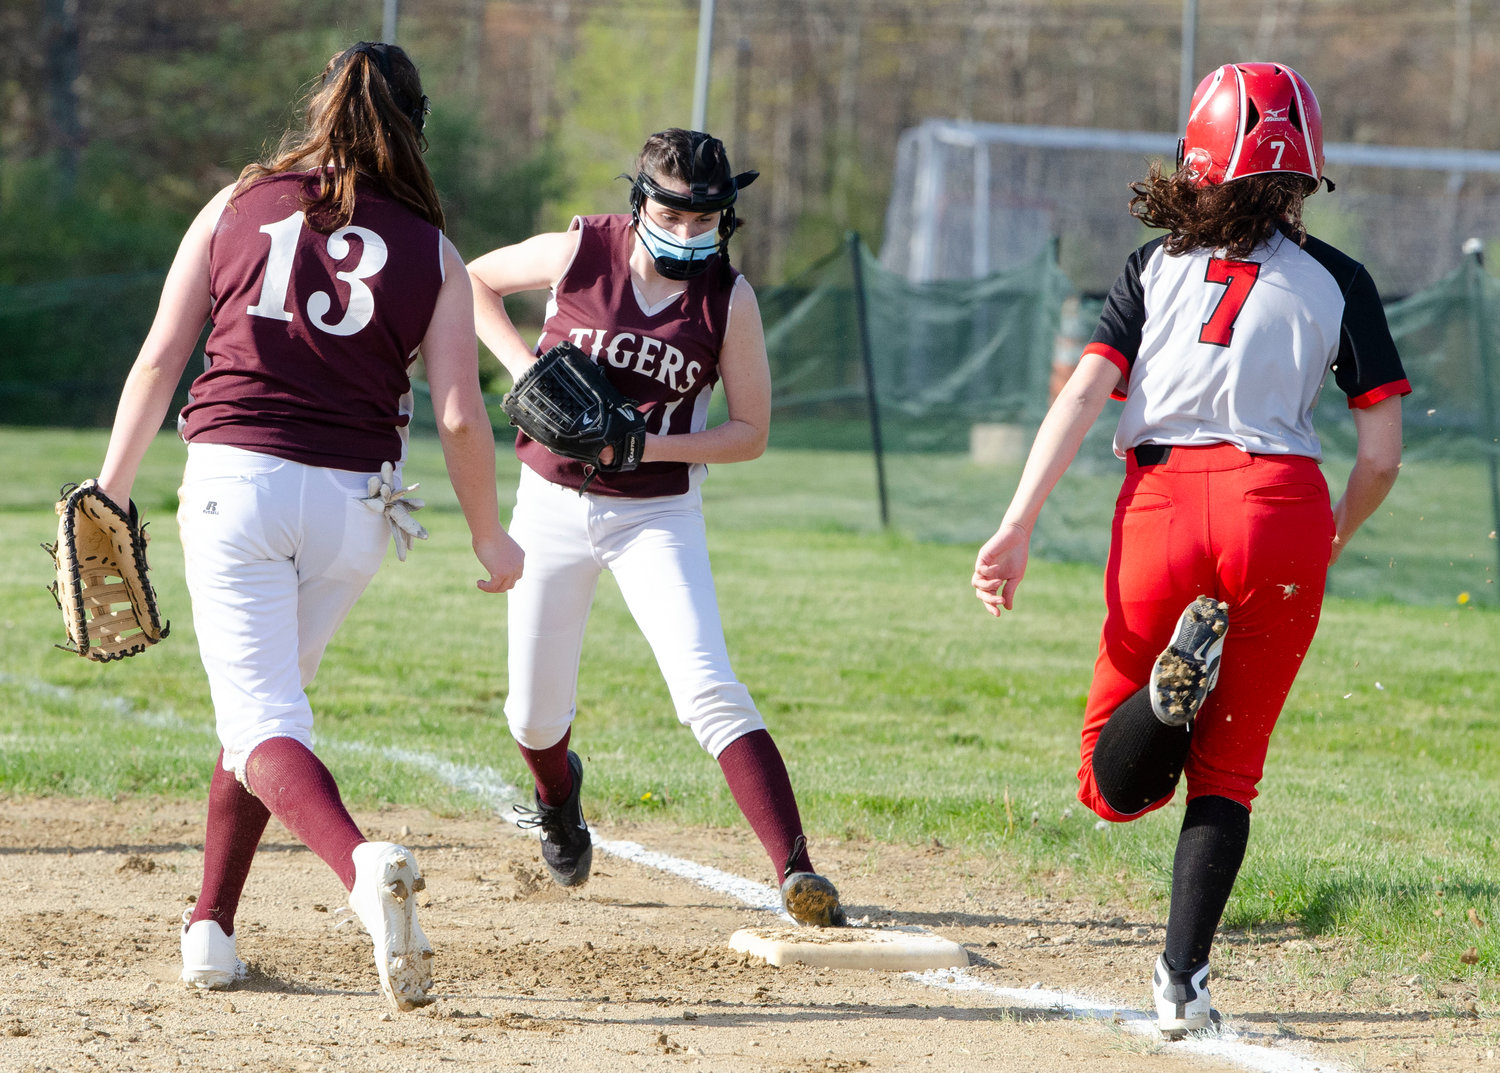 Michaela Andrews steps on first base for an out. Abigail Monkevicz looks on (left).